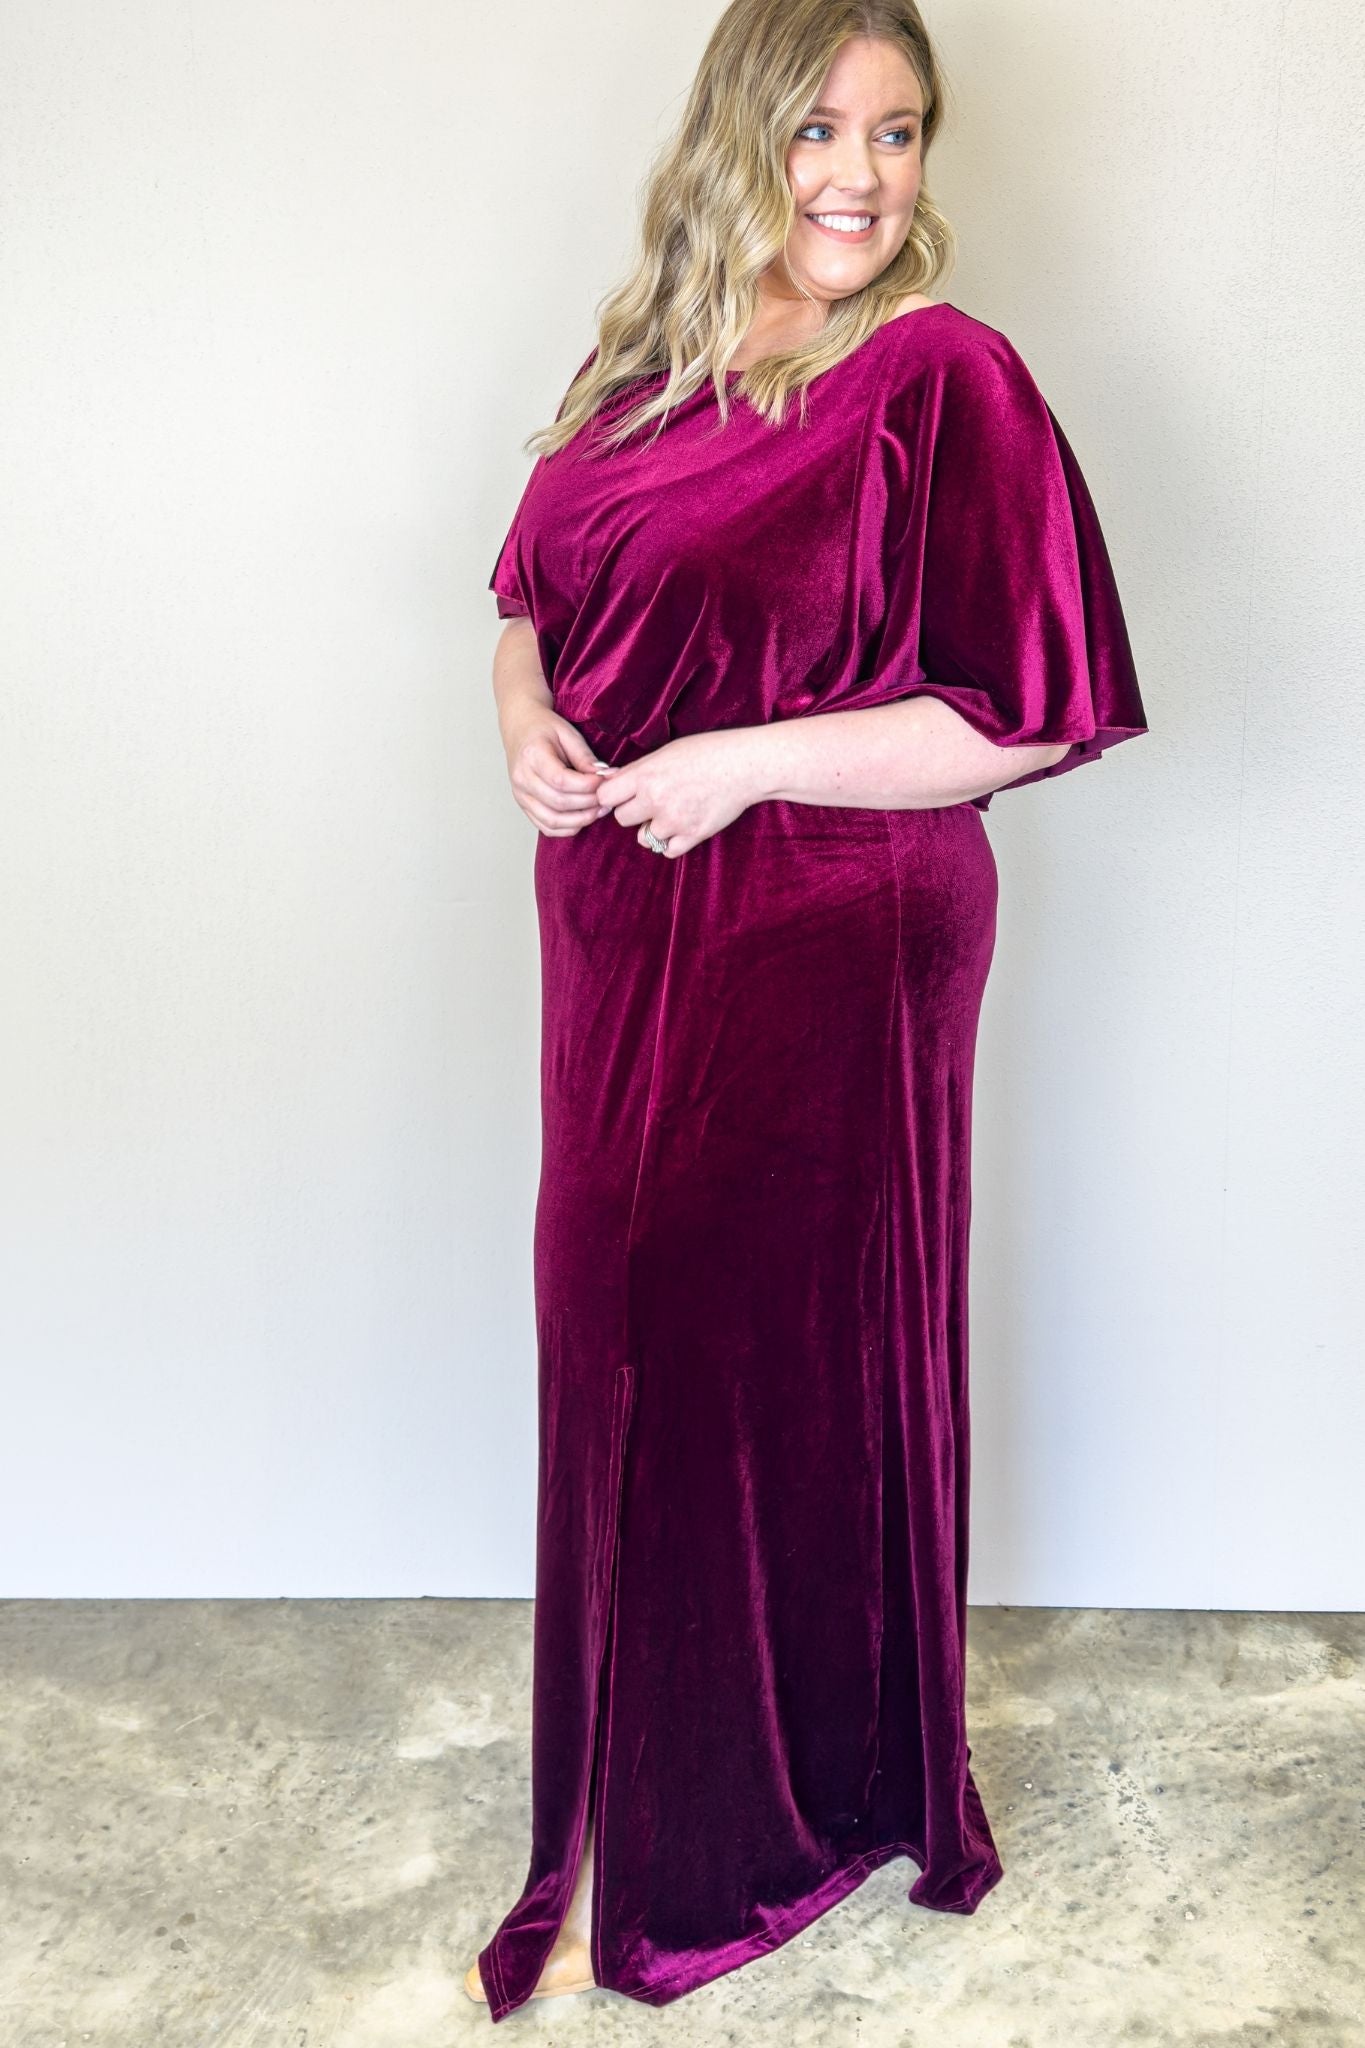 A stunning burgundy velvet dress, perfect for any occasion. Its rich color and luxurious fabric make it a must-have in your wardrobe.